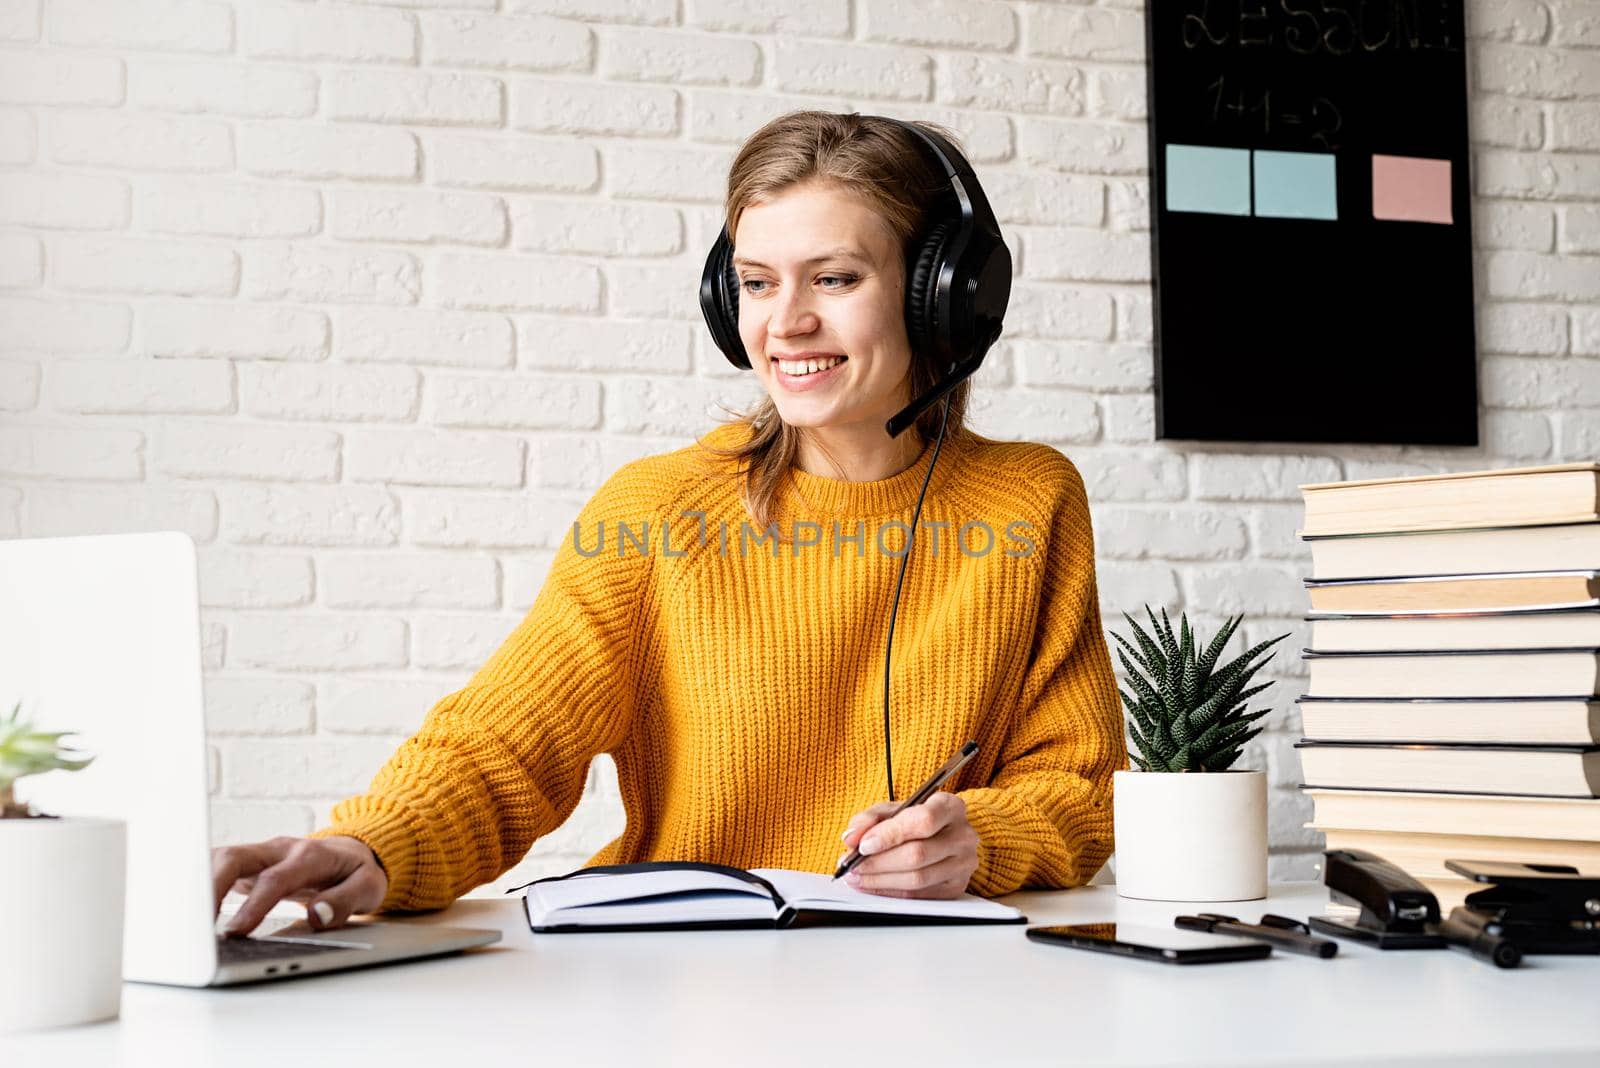 Young smiling woman in black headphones studying online using laptop writing in notebook by Desperada